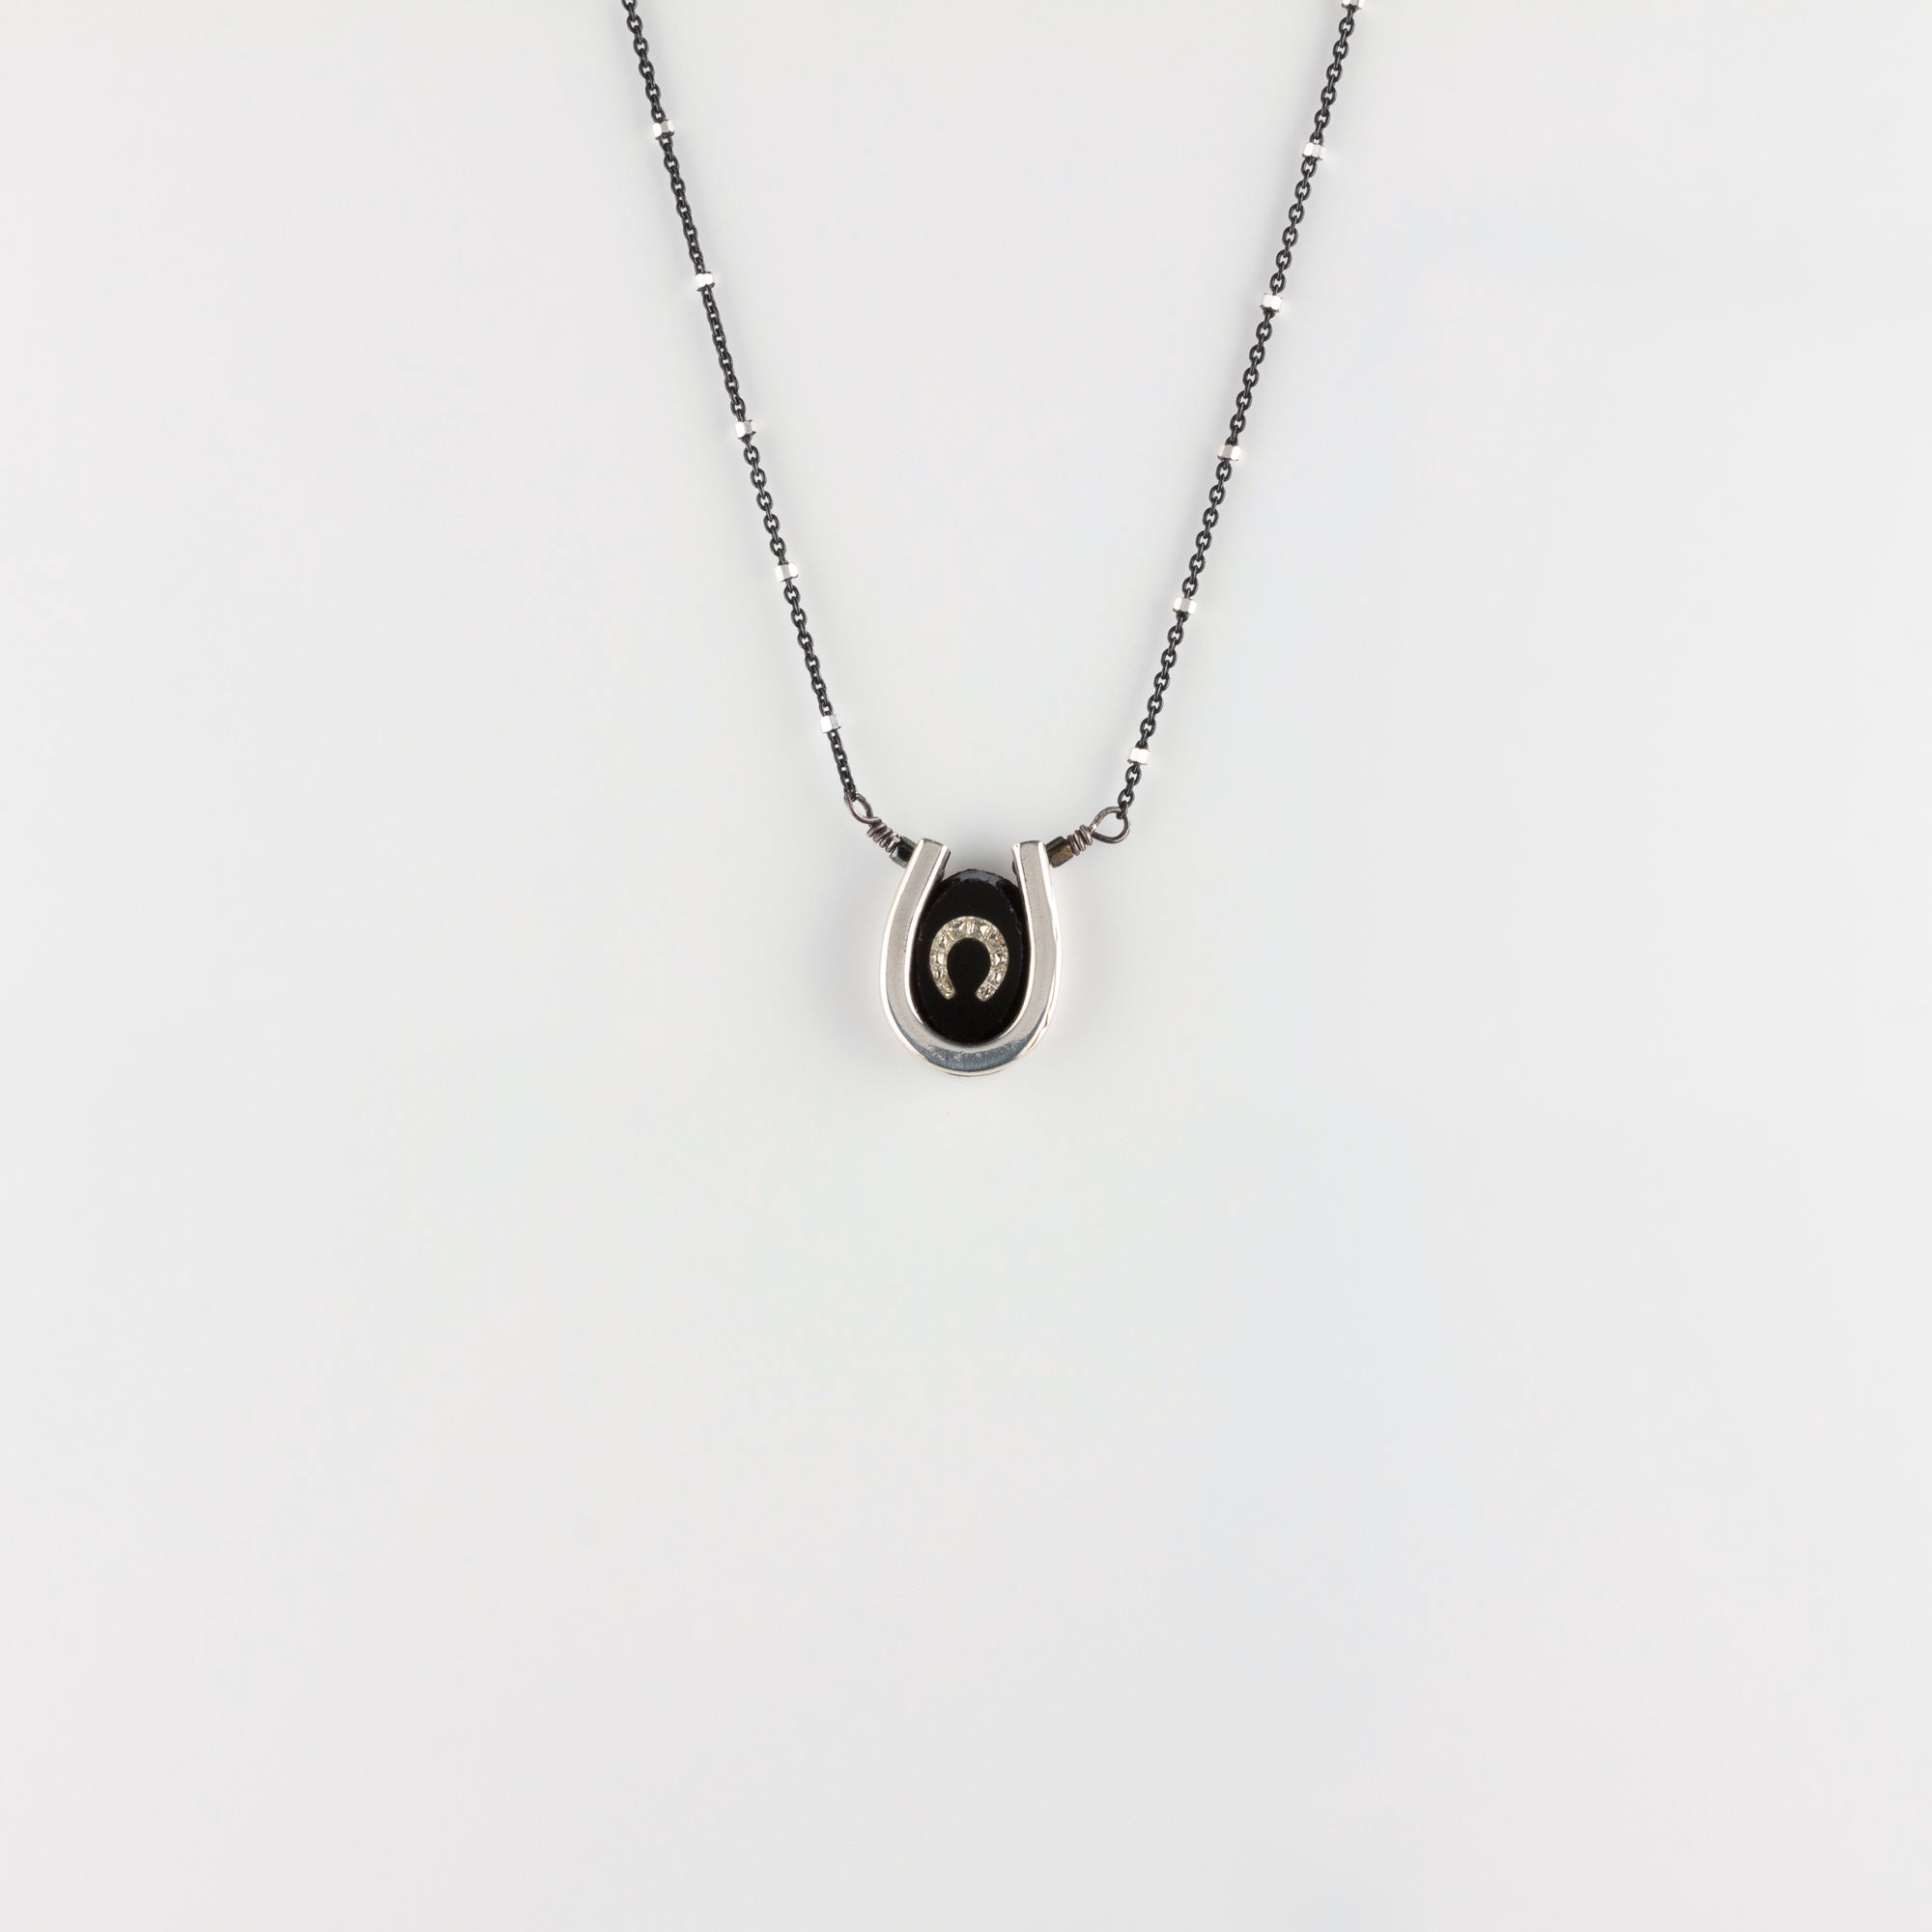 DOUBLE LUCK // SILVER NECKLACE // BLACK & WHITE